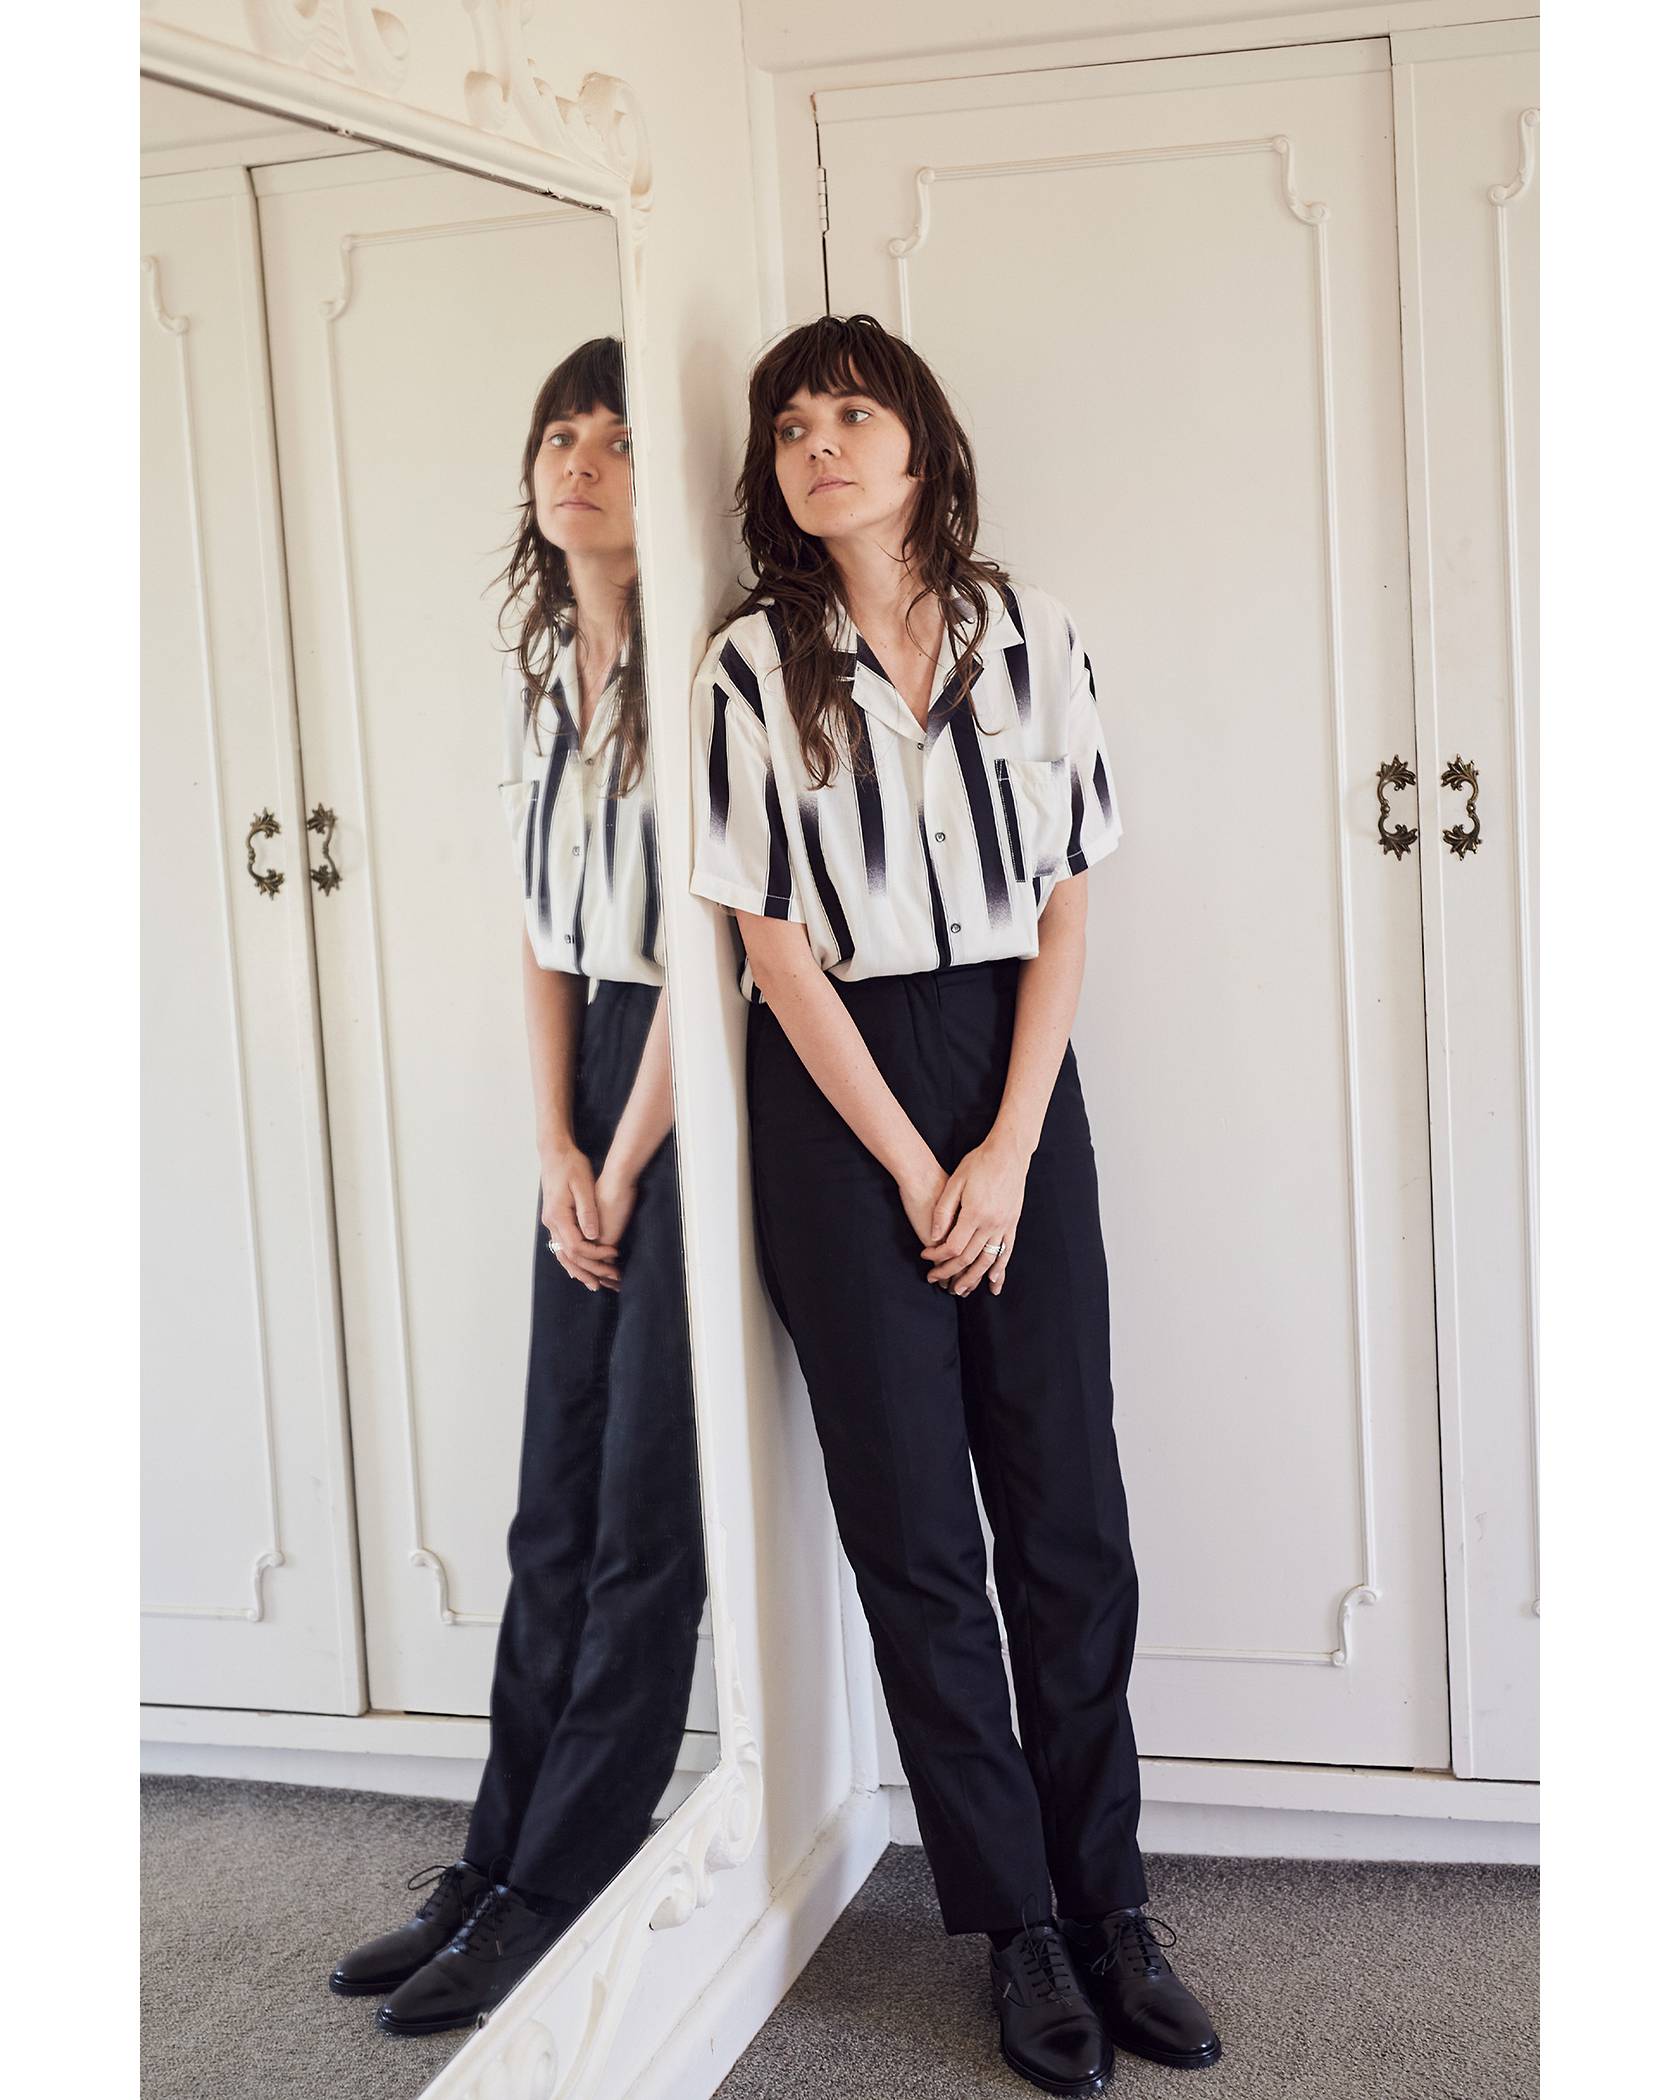 Levi's x Here and There Festival founder Courtney Barnett